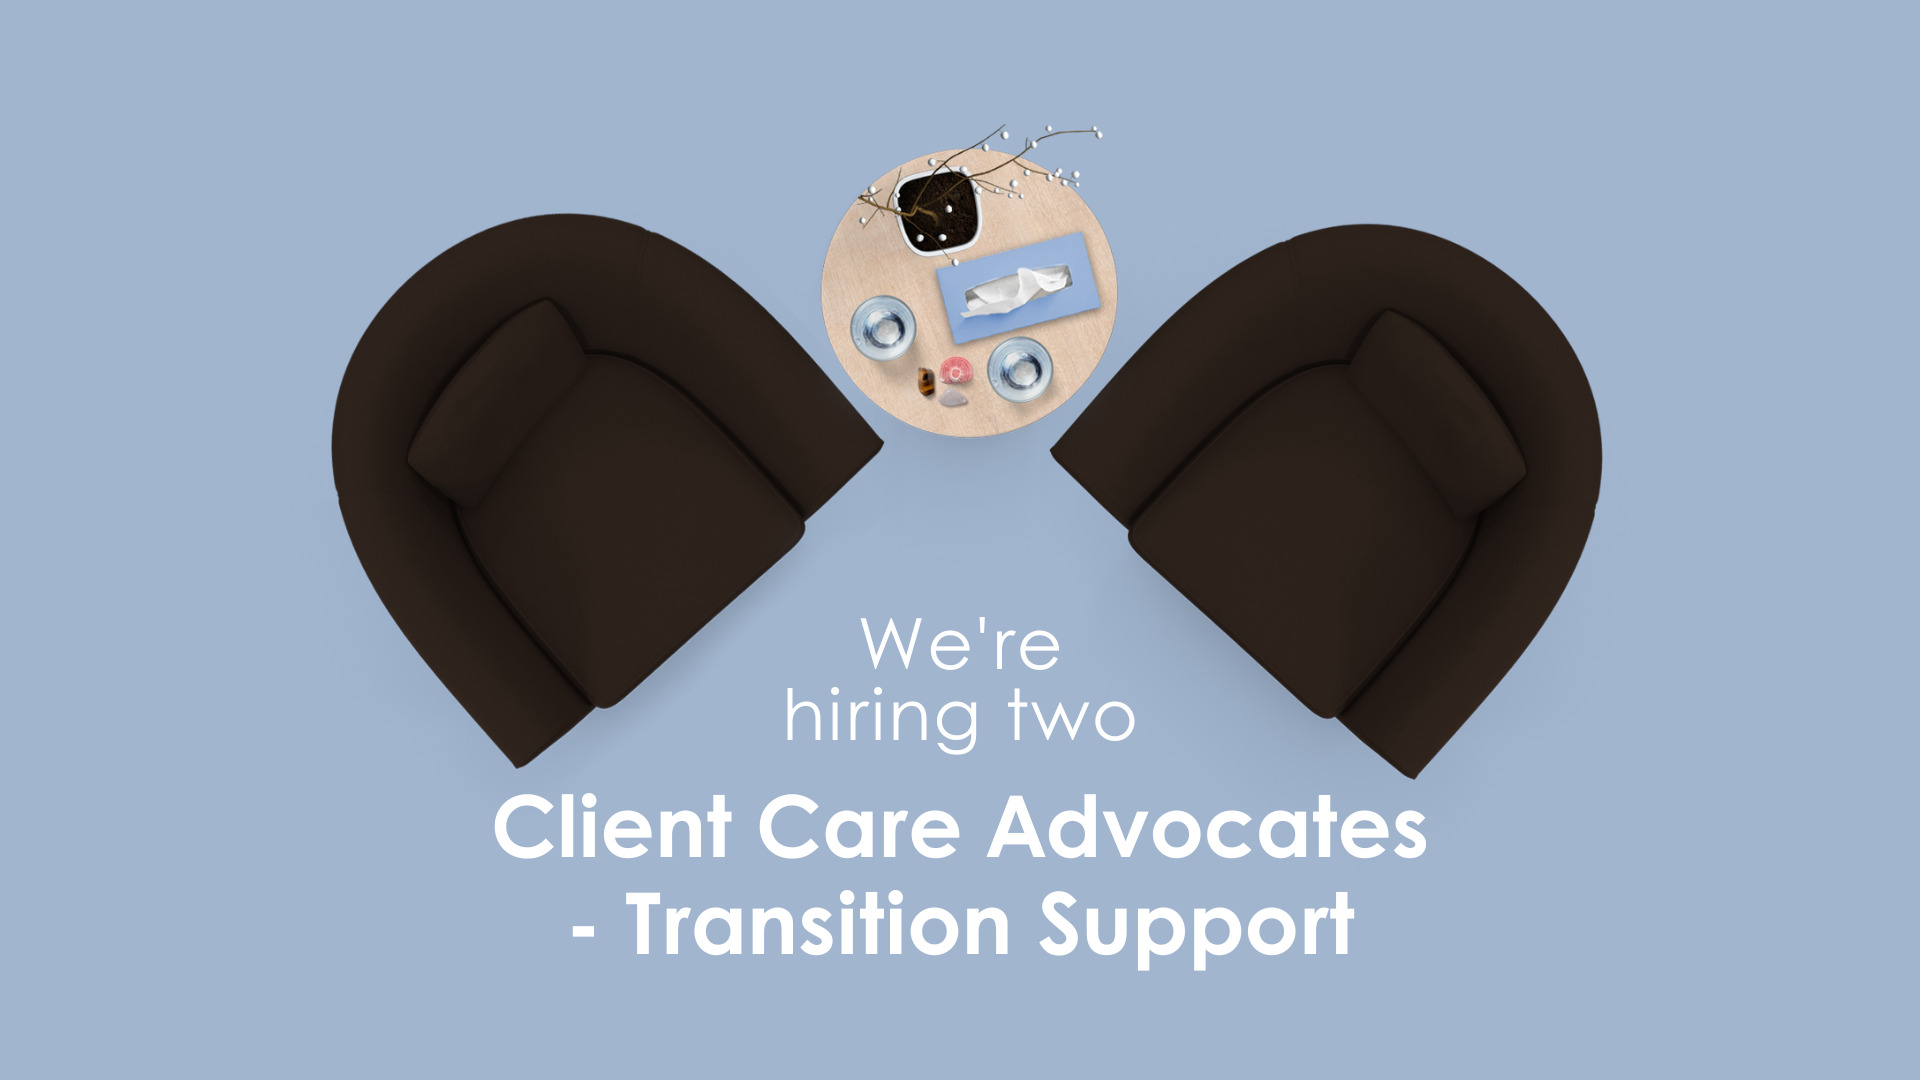 Light blue background with two dark chairs and a small table with two glasses of water, a tissue box, and a plant. Text says 'We're hiring two Client Care Advocates - Transition Support'